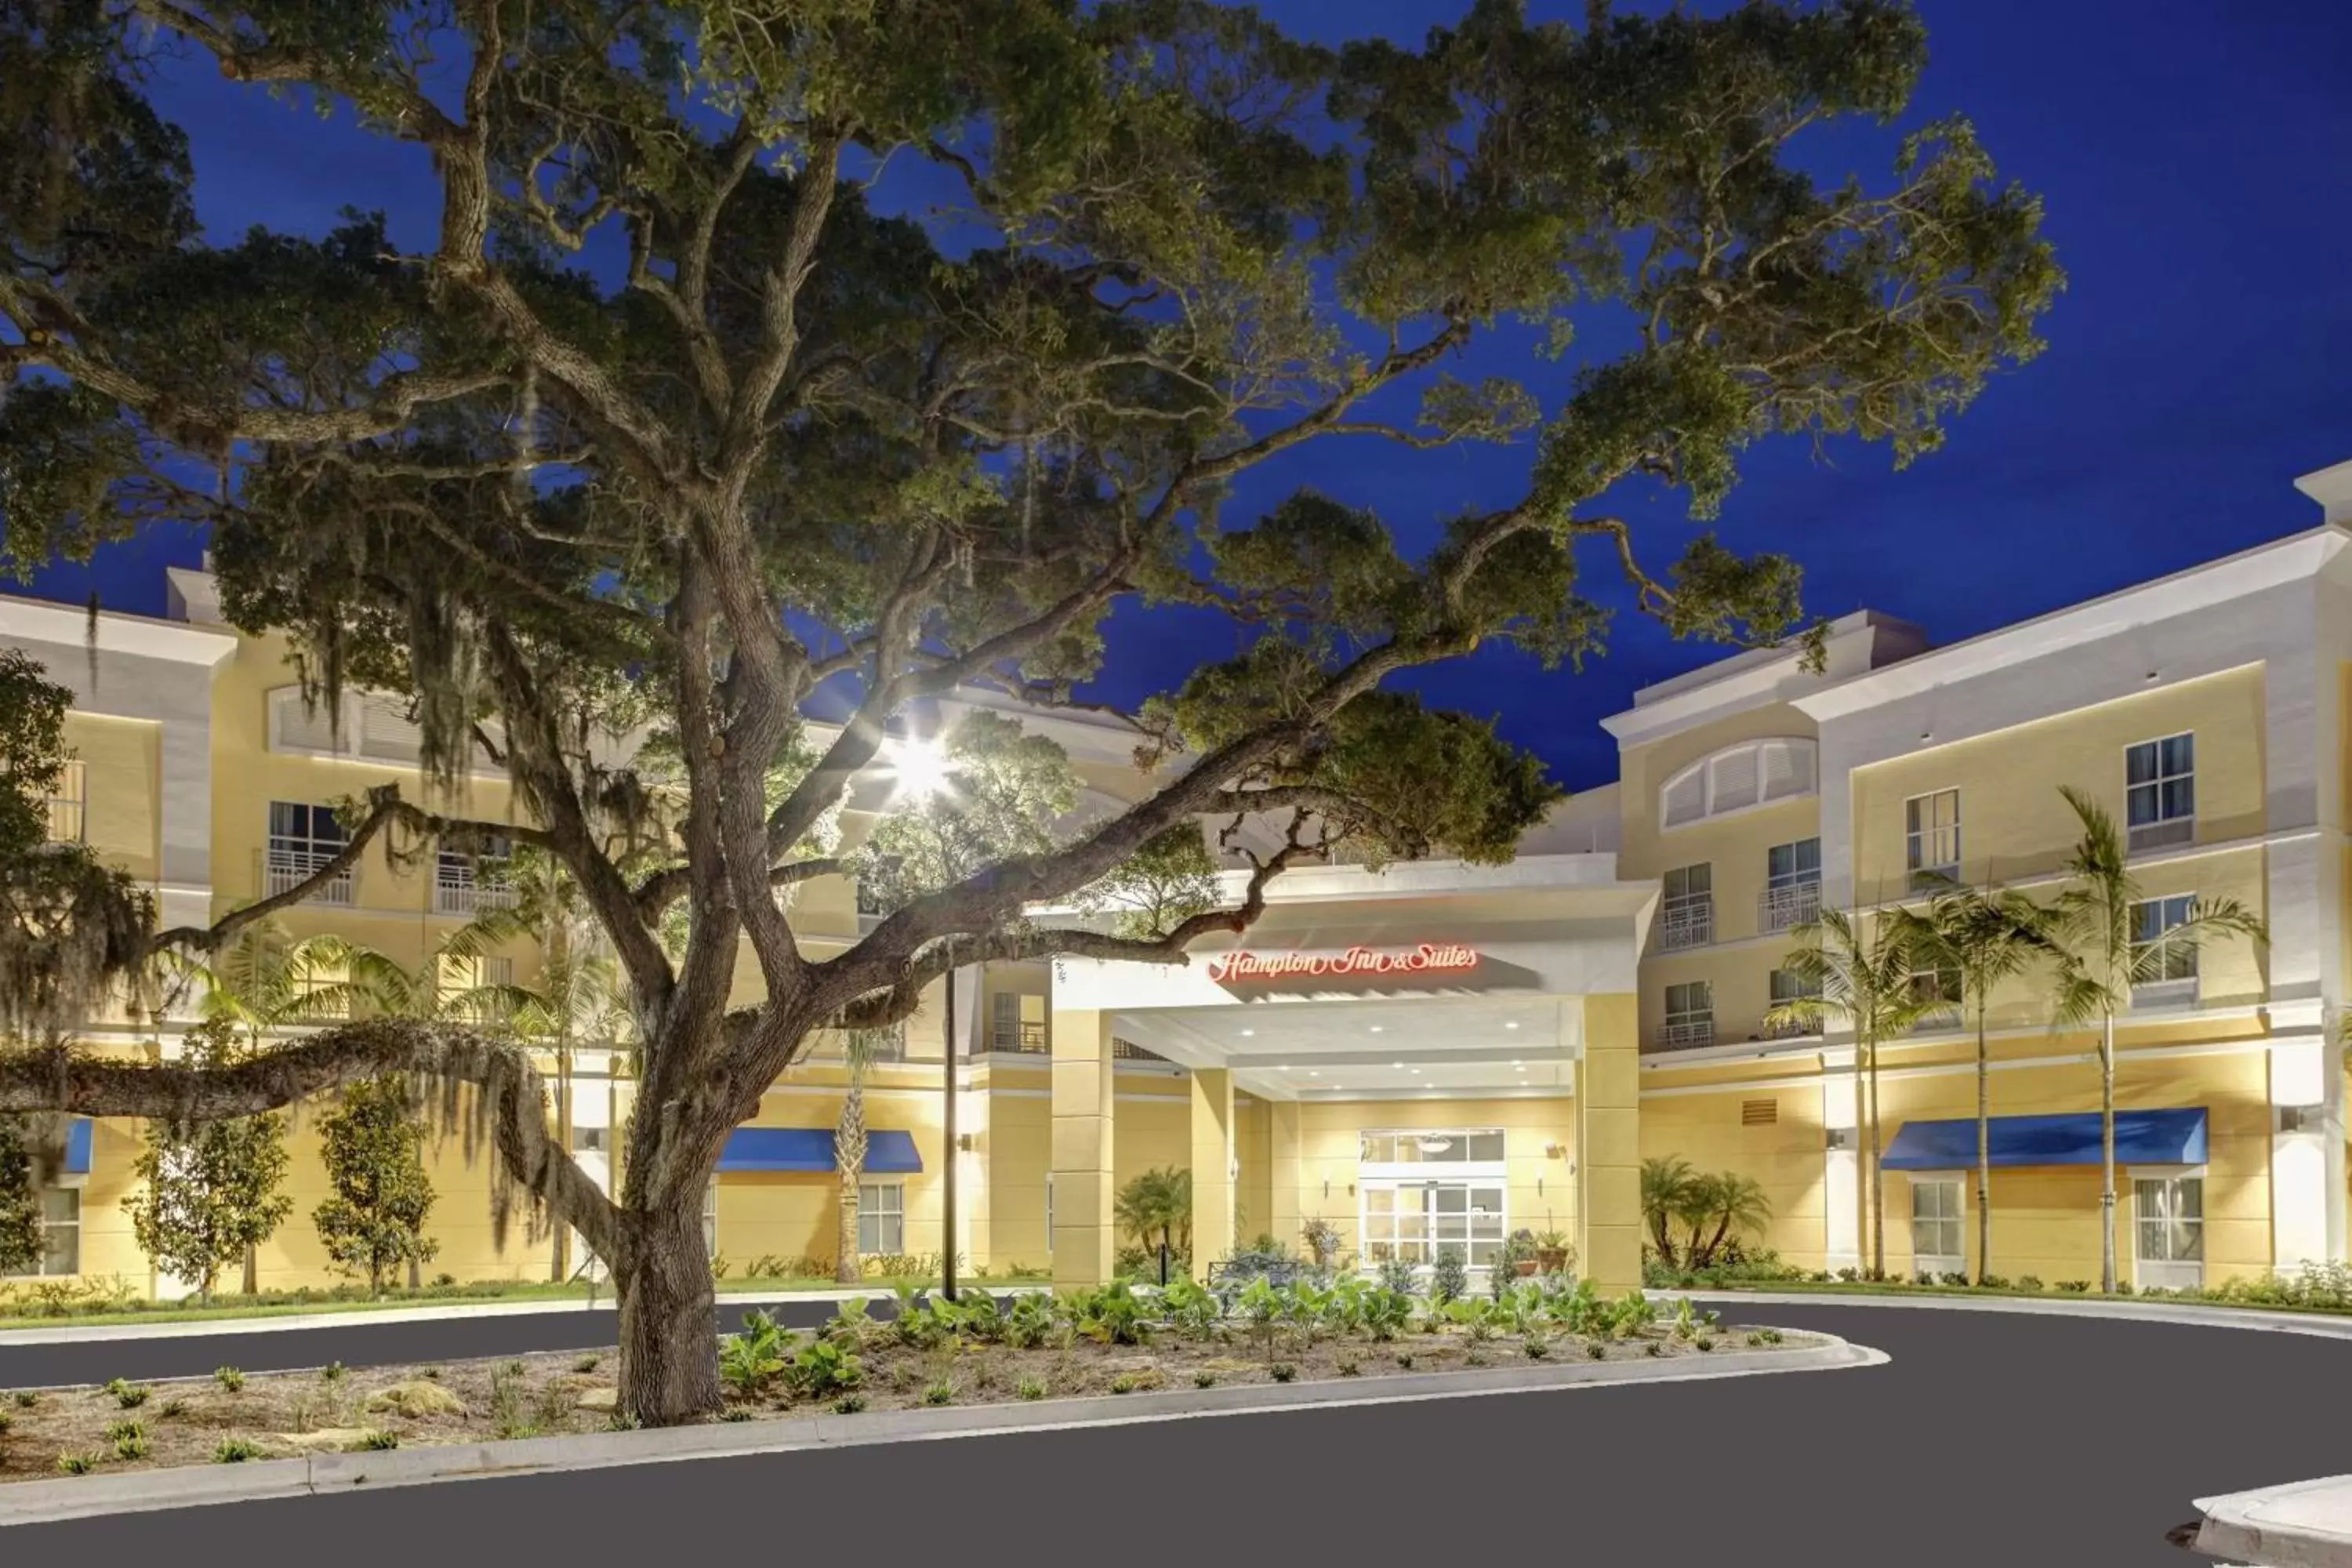 Property Building in Hampton Inn and Suites by Hilton Vero Beach-Downtown